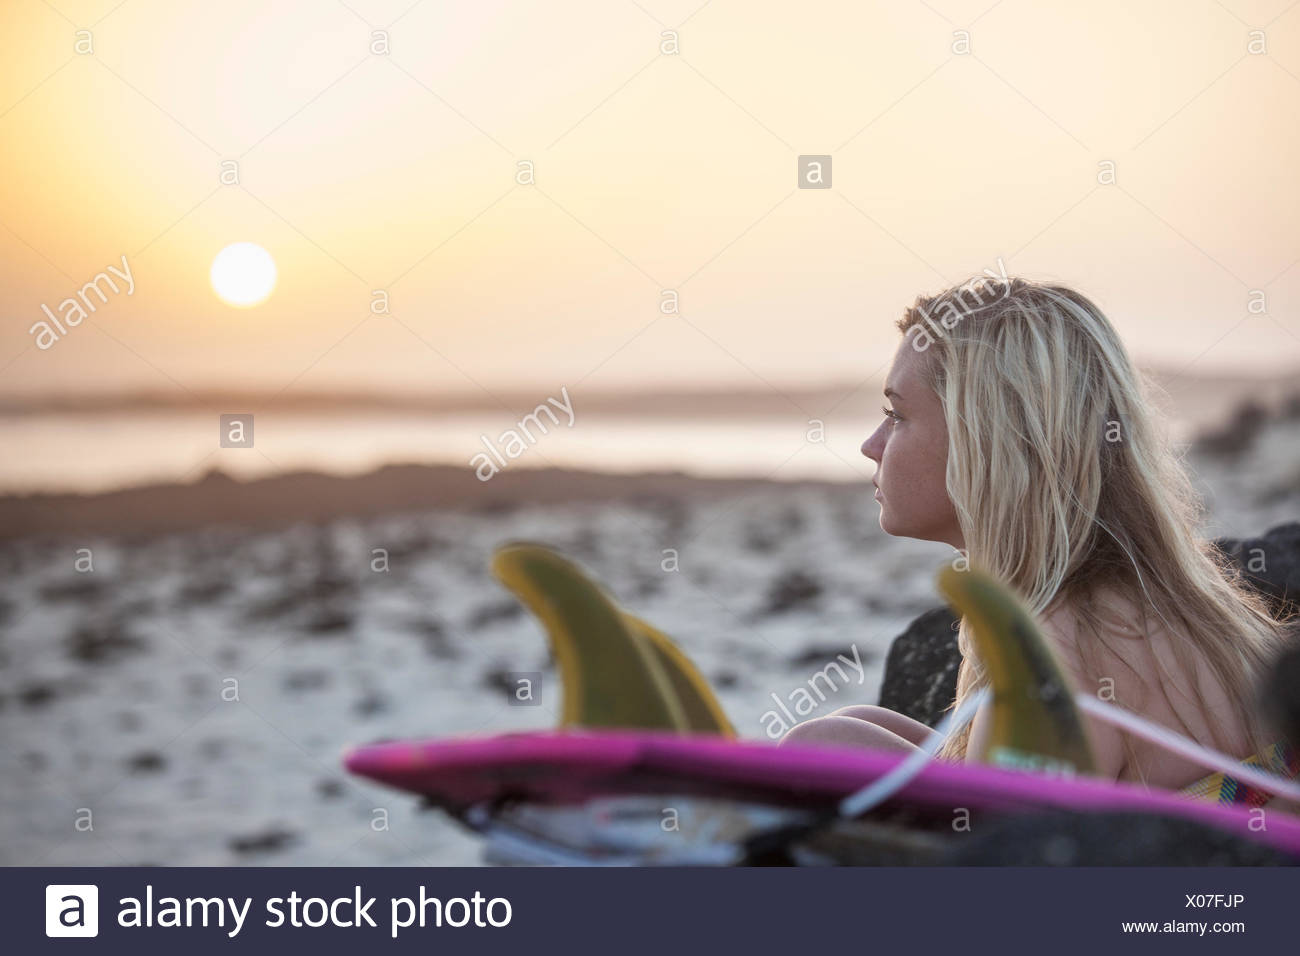 Blonde Surfer Girl Sitting On The Beach At Sunset Stock Photo